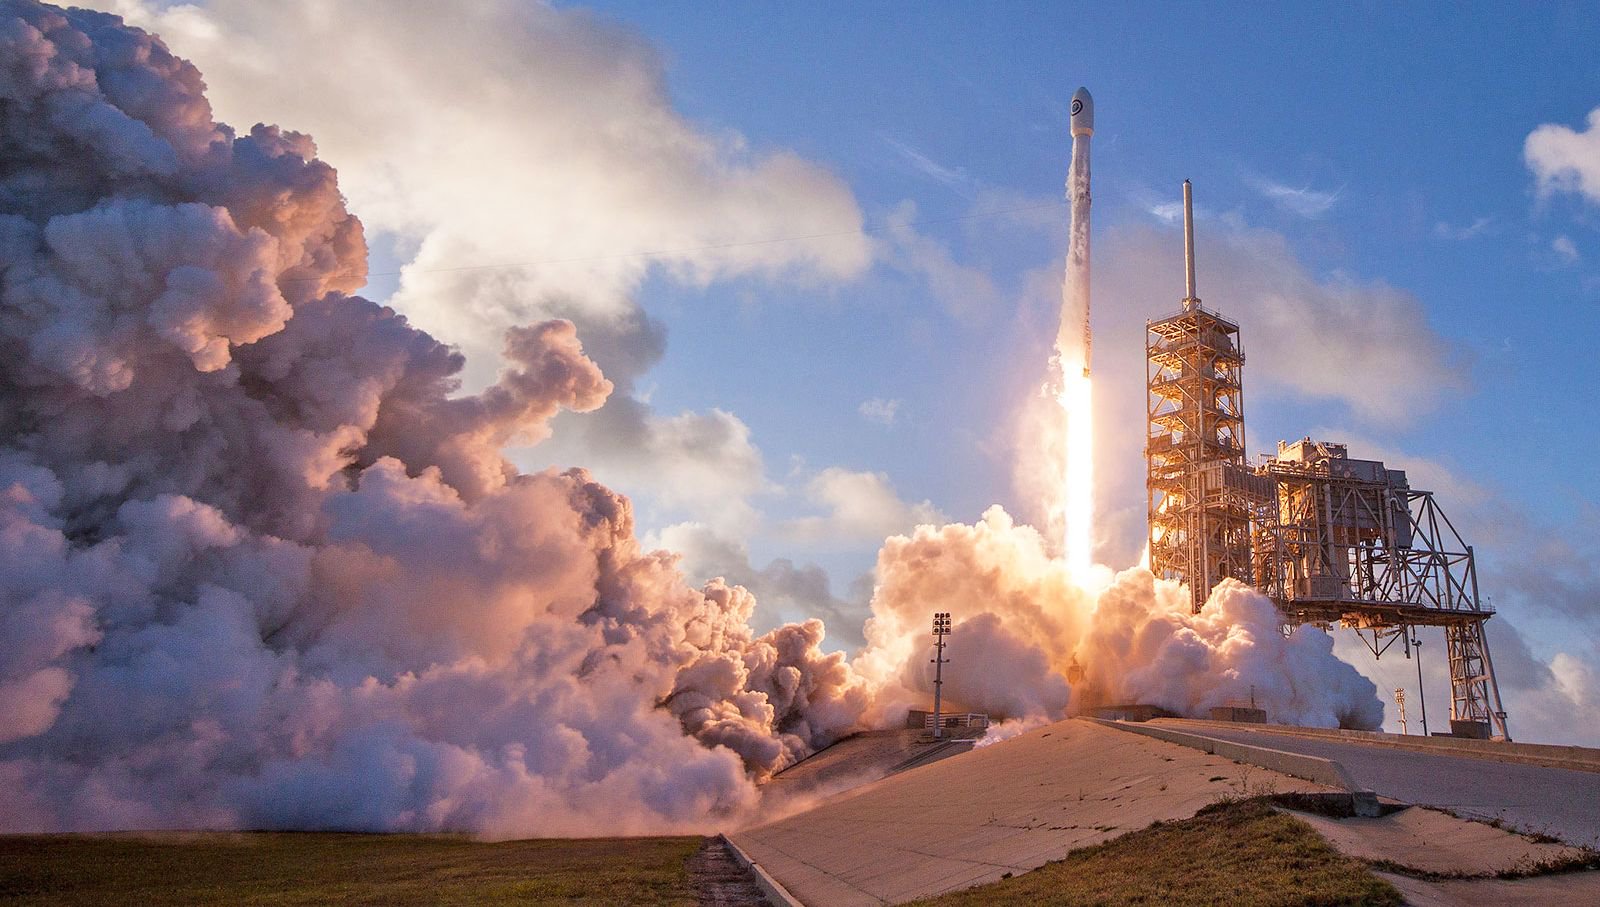 On the weekend, SpaceX will orbit two communications satellites